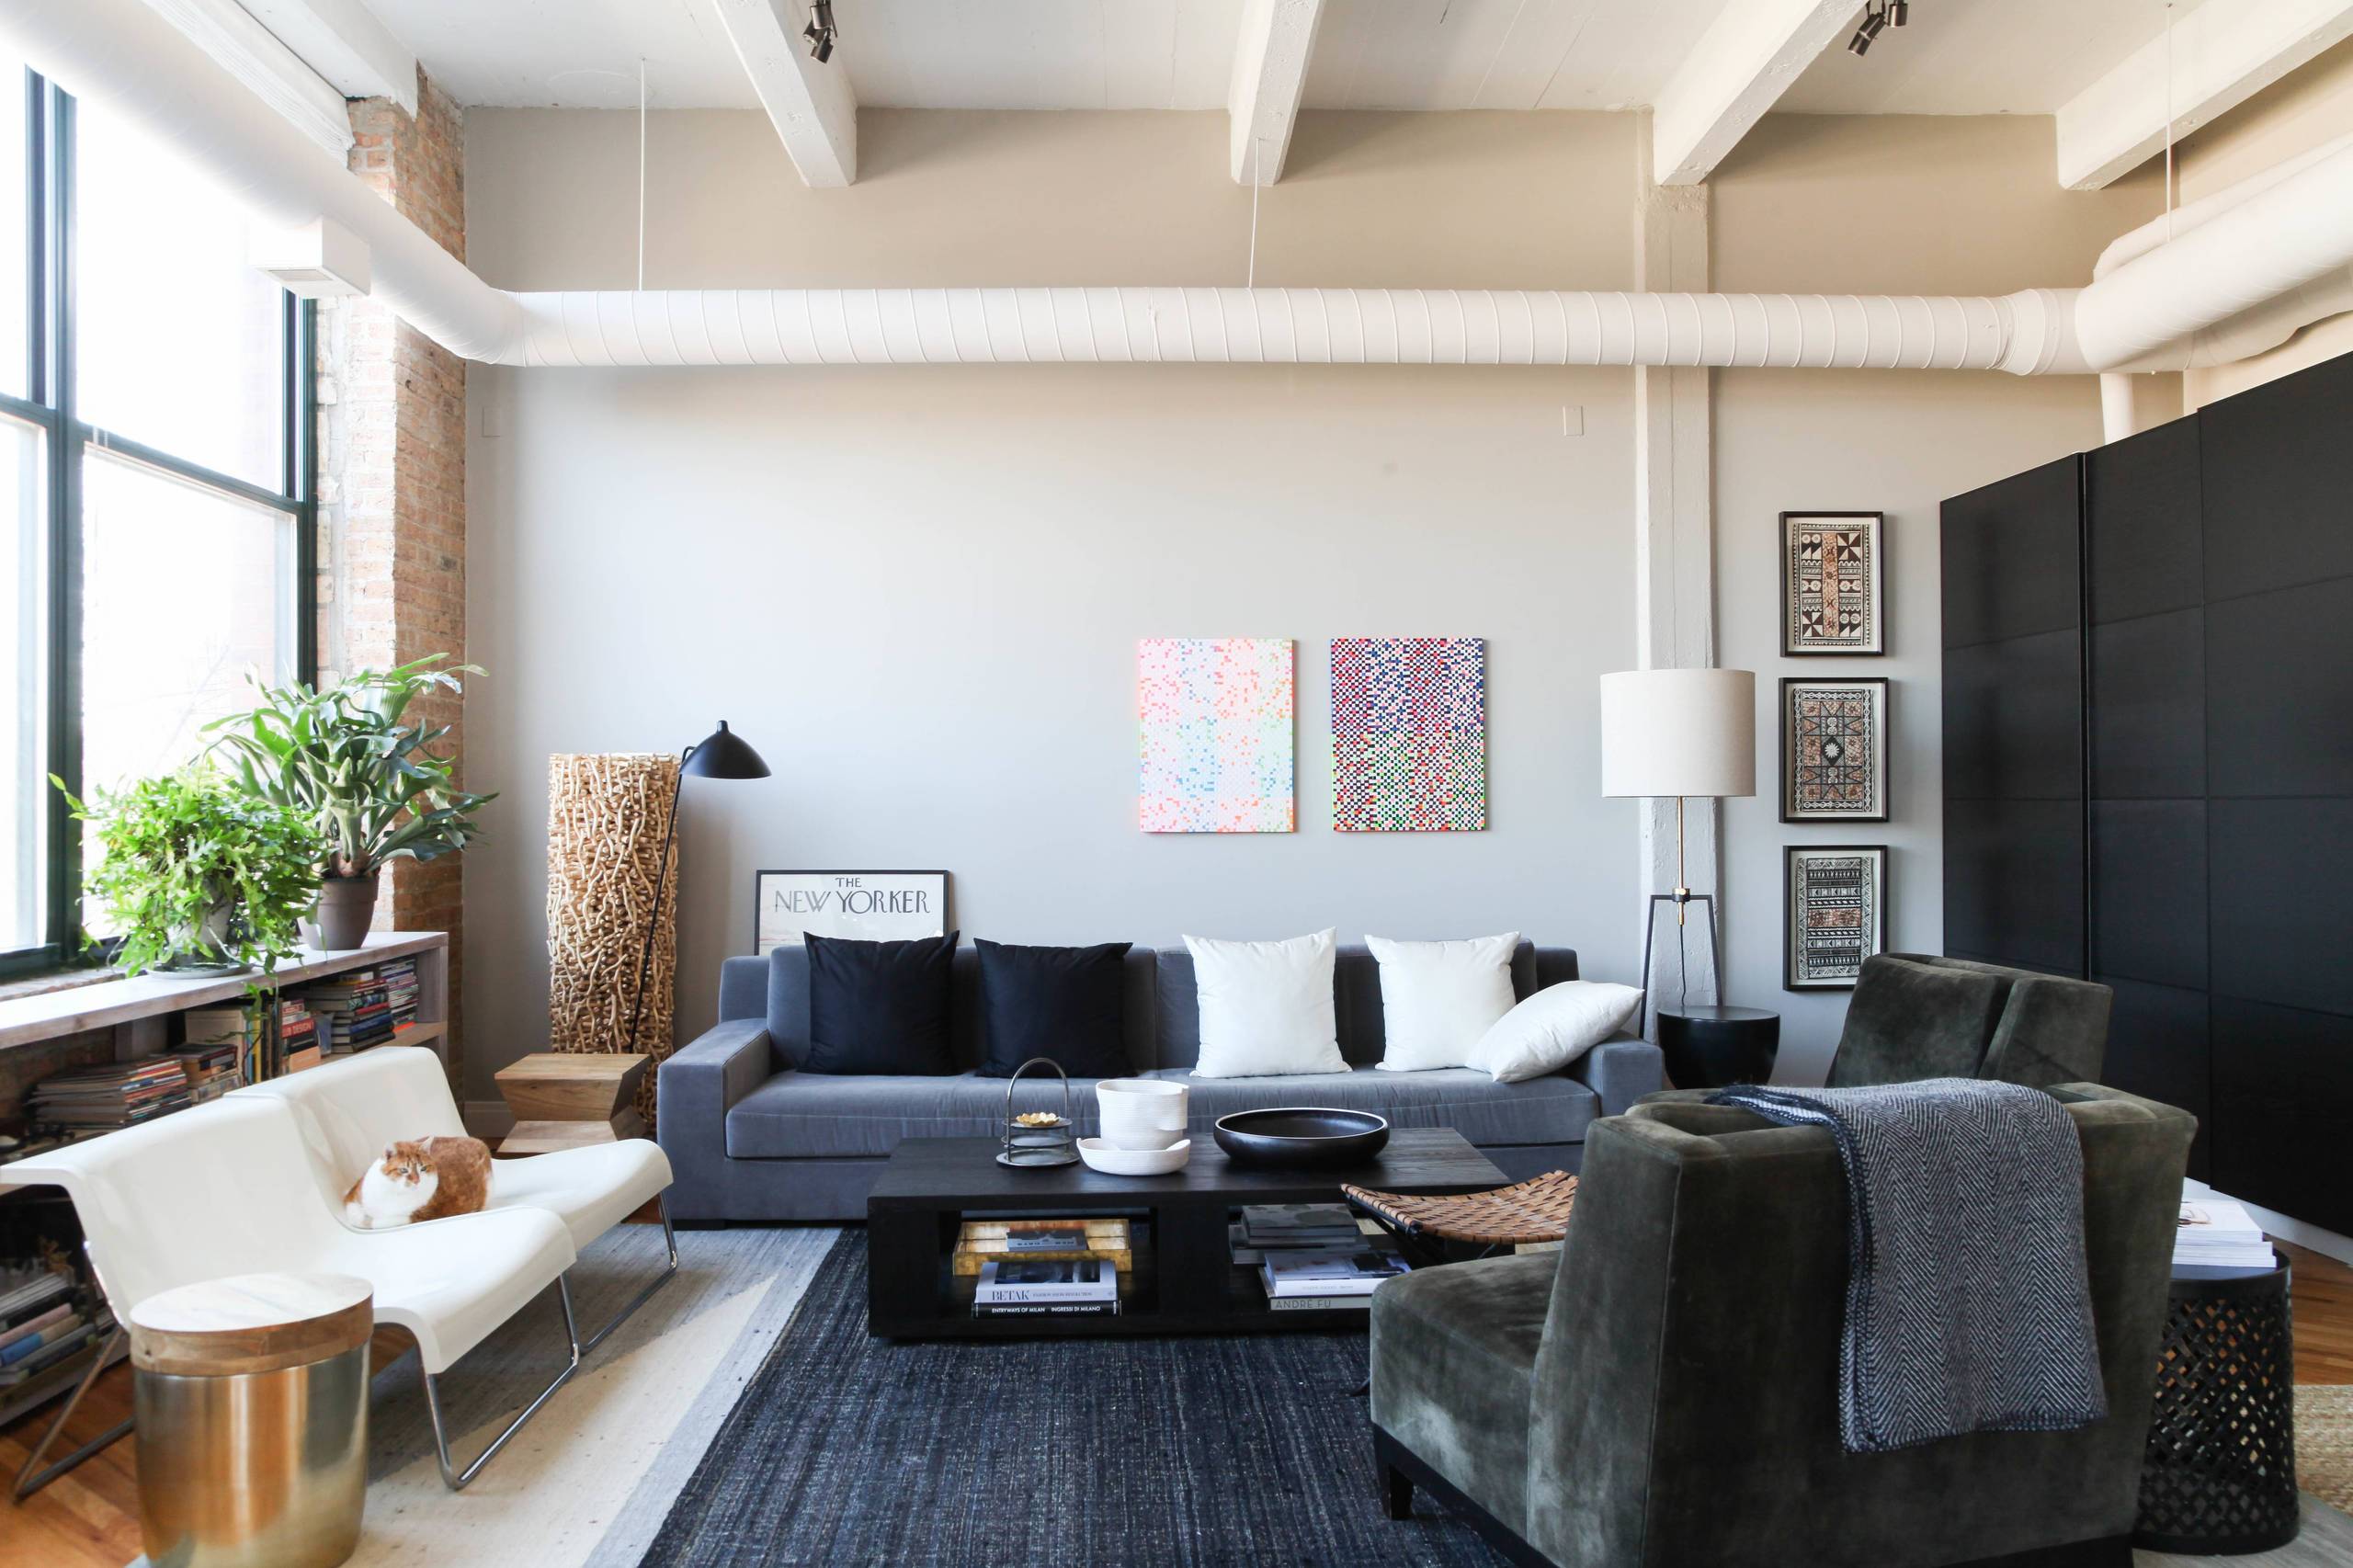 Simple industrial living room (from Houzz)